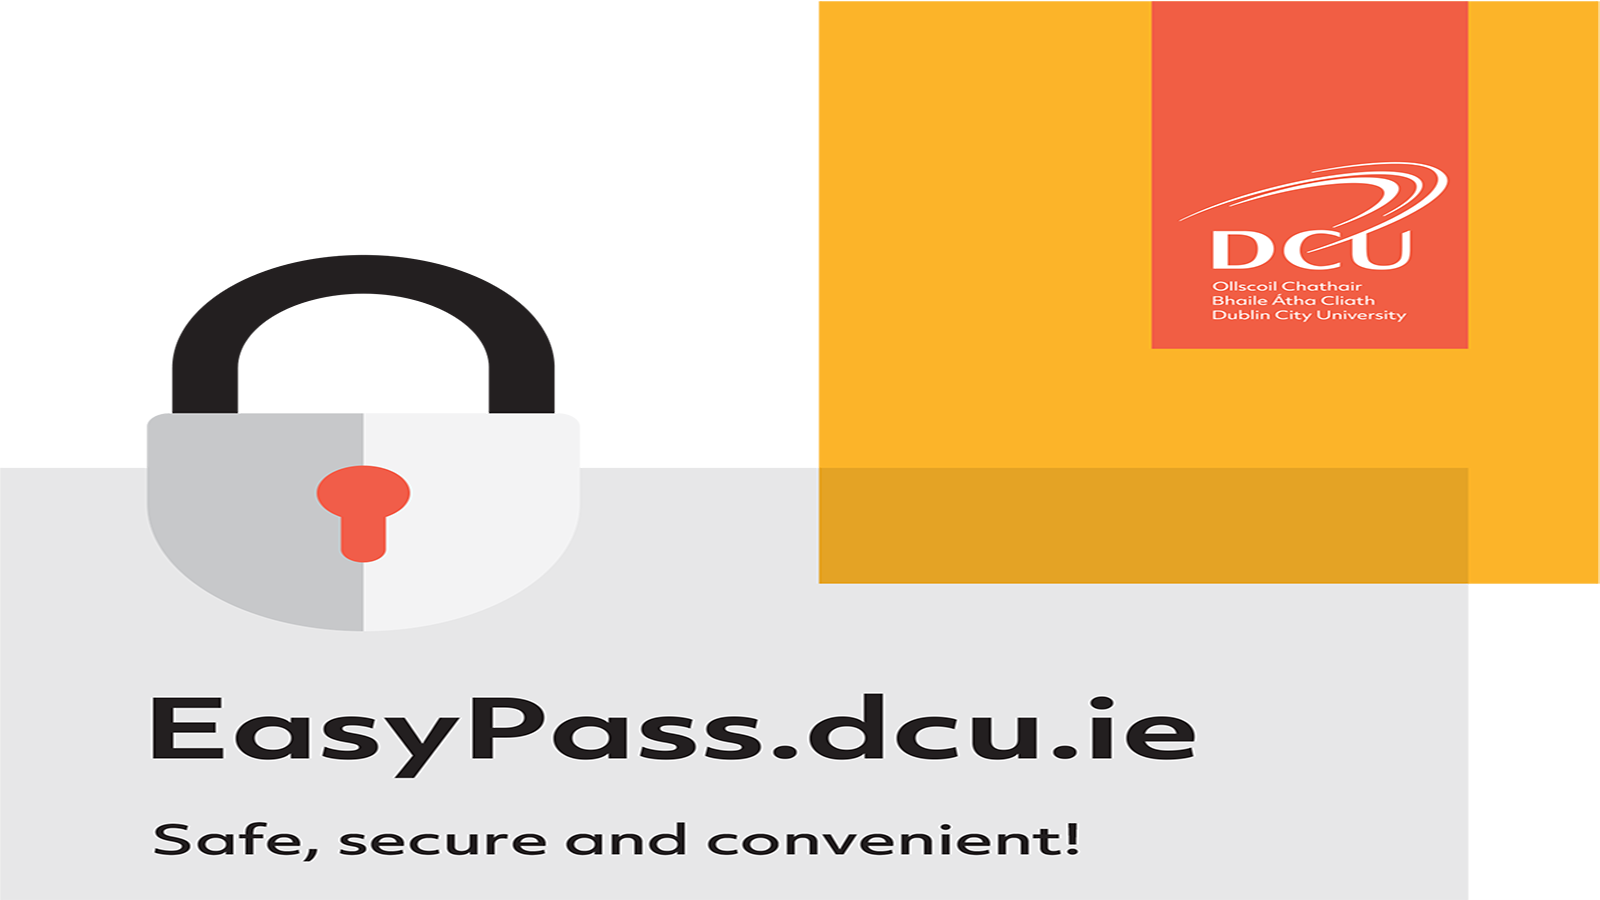 EasyPass, DCU's new automated password self-service.